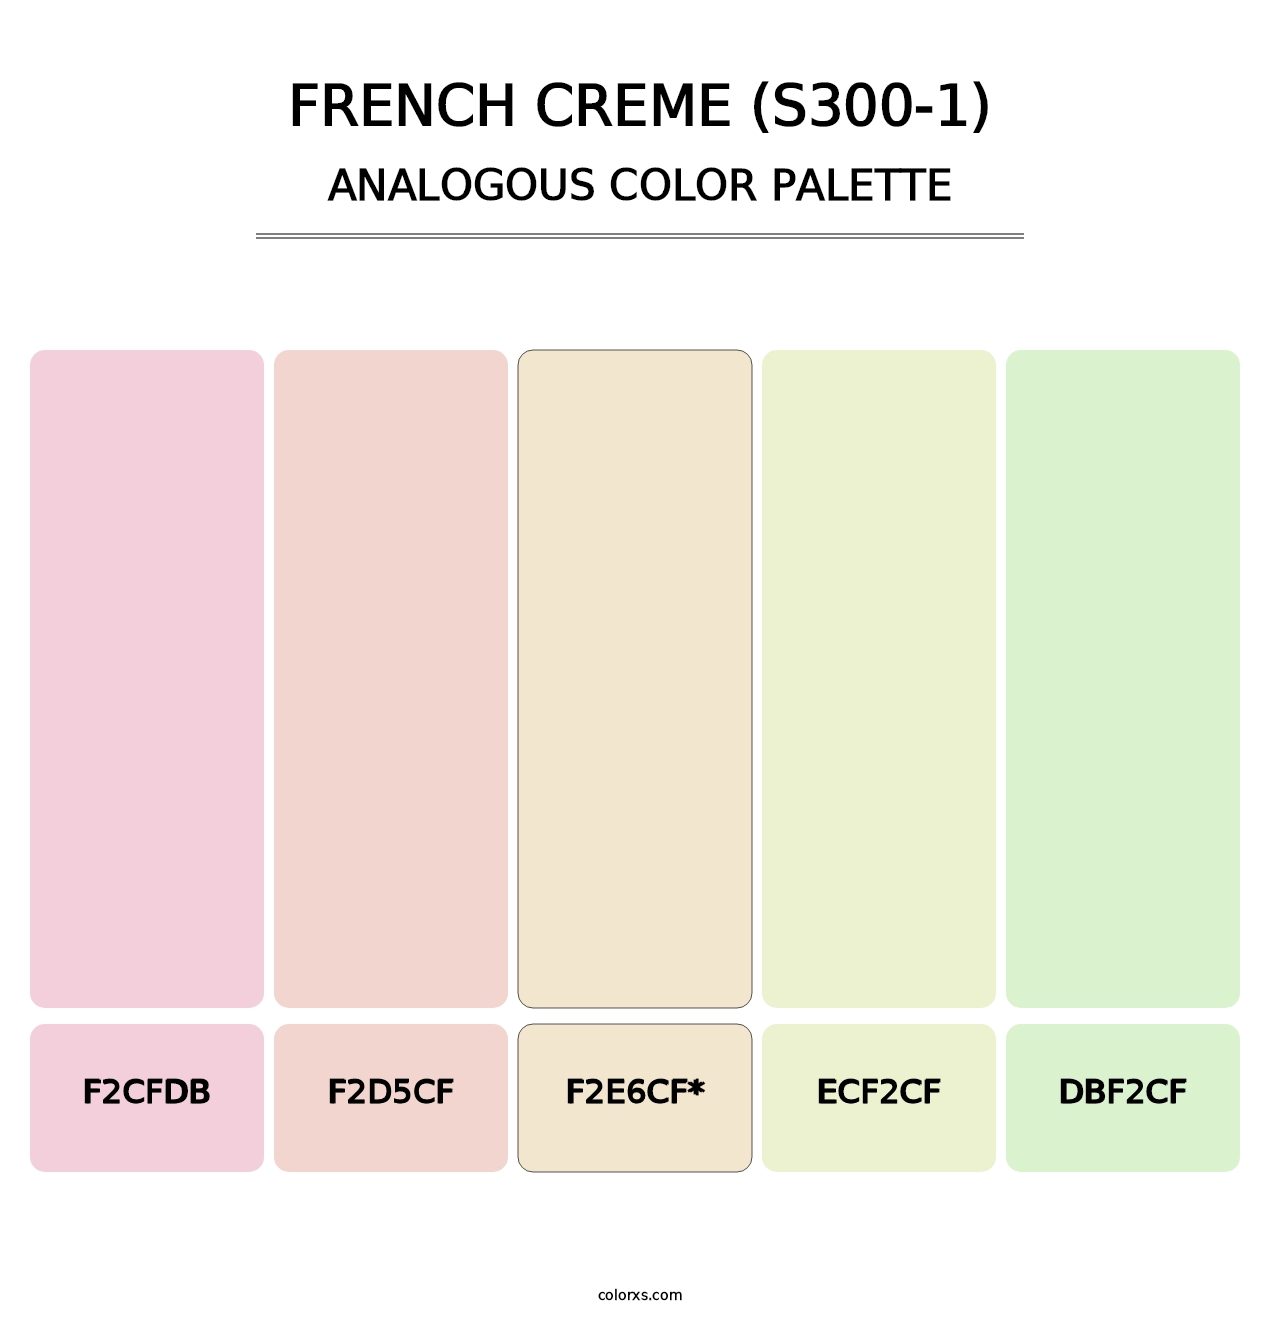 French Creme (S300-1) - Analogous Color Palette